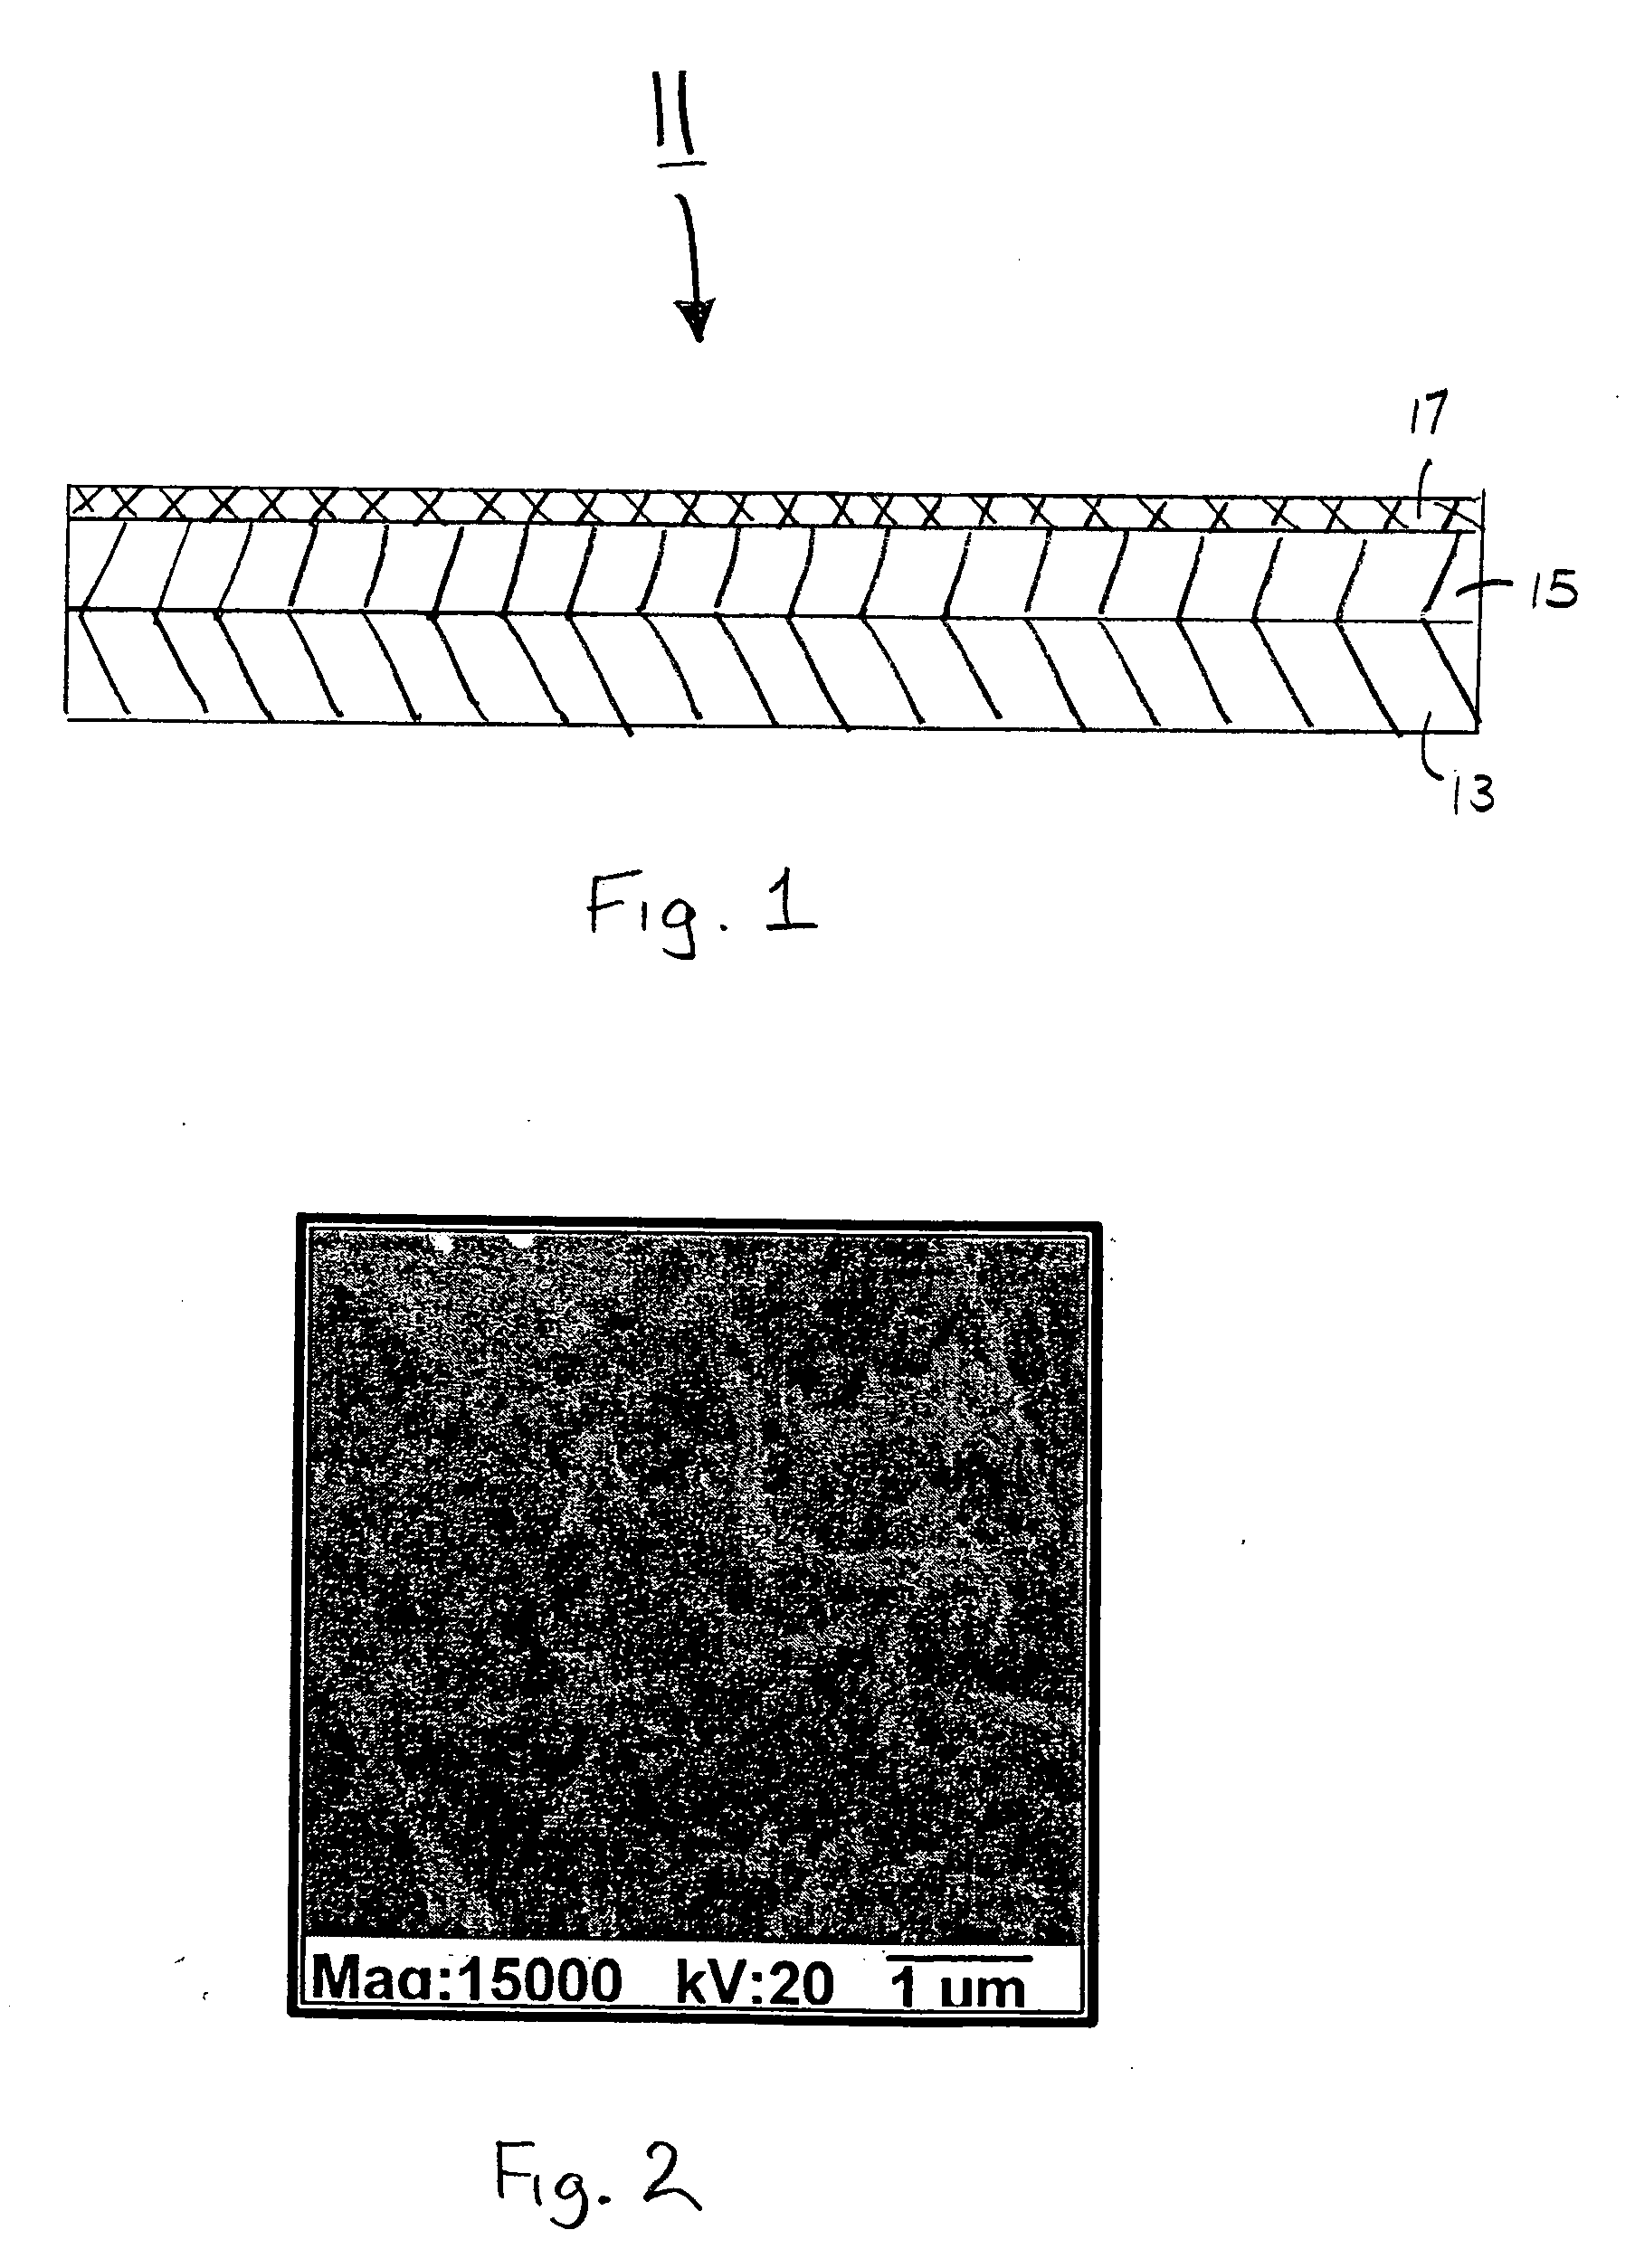 Gas diffusion electrode and method of making the same